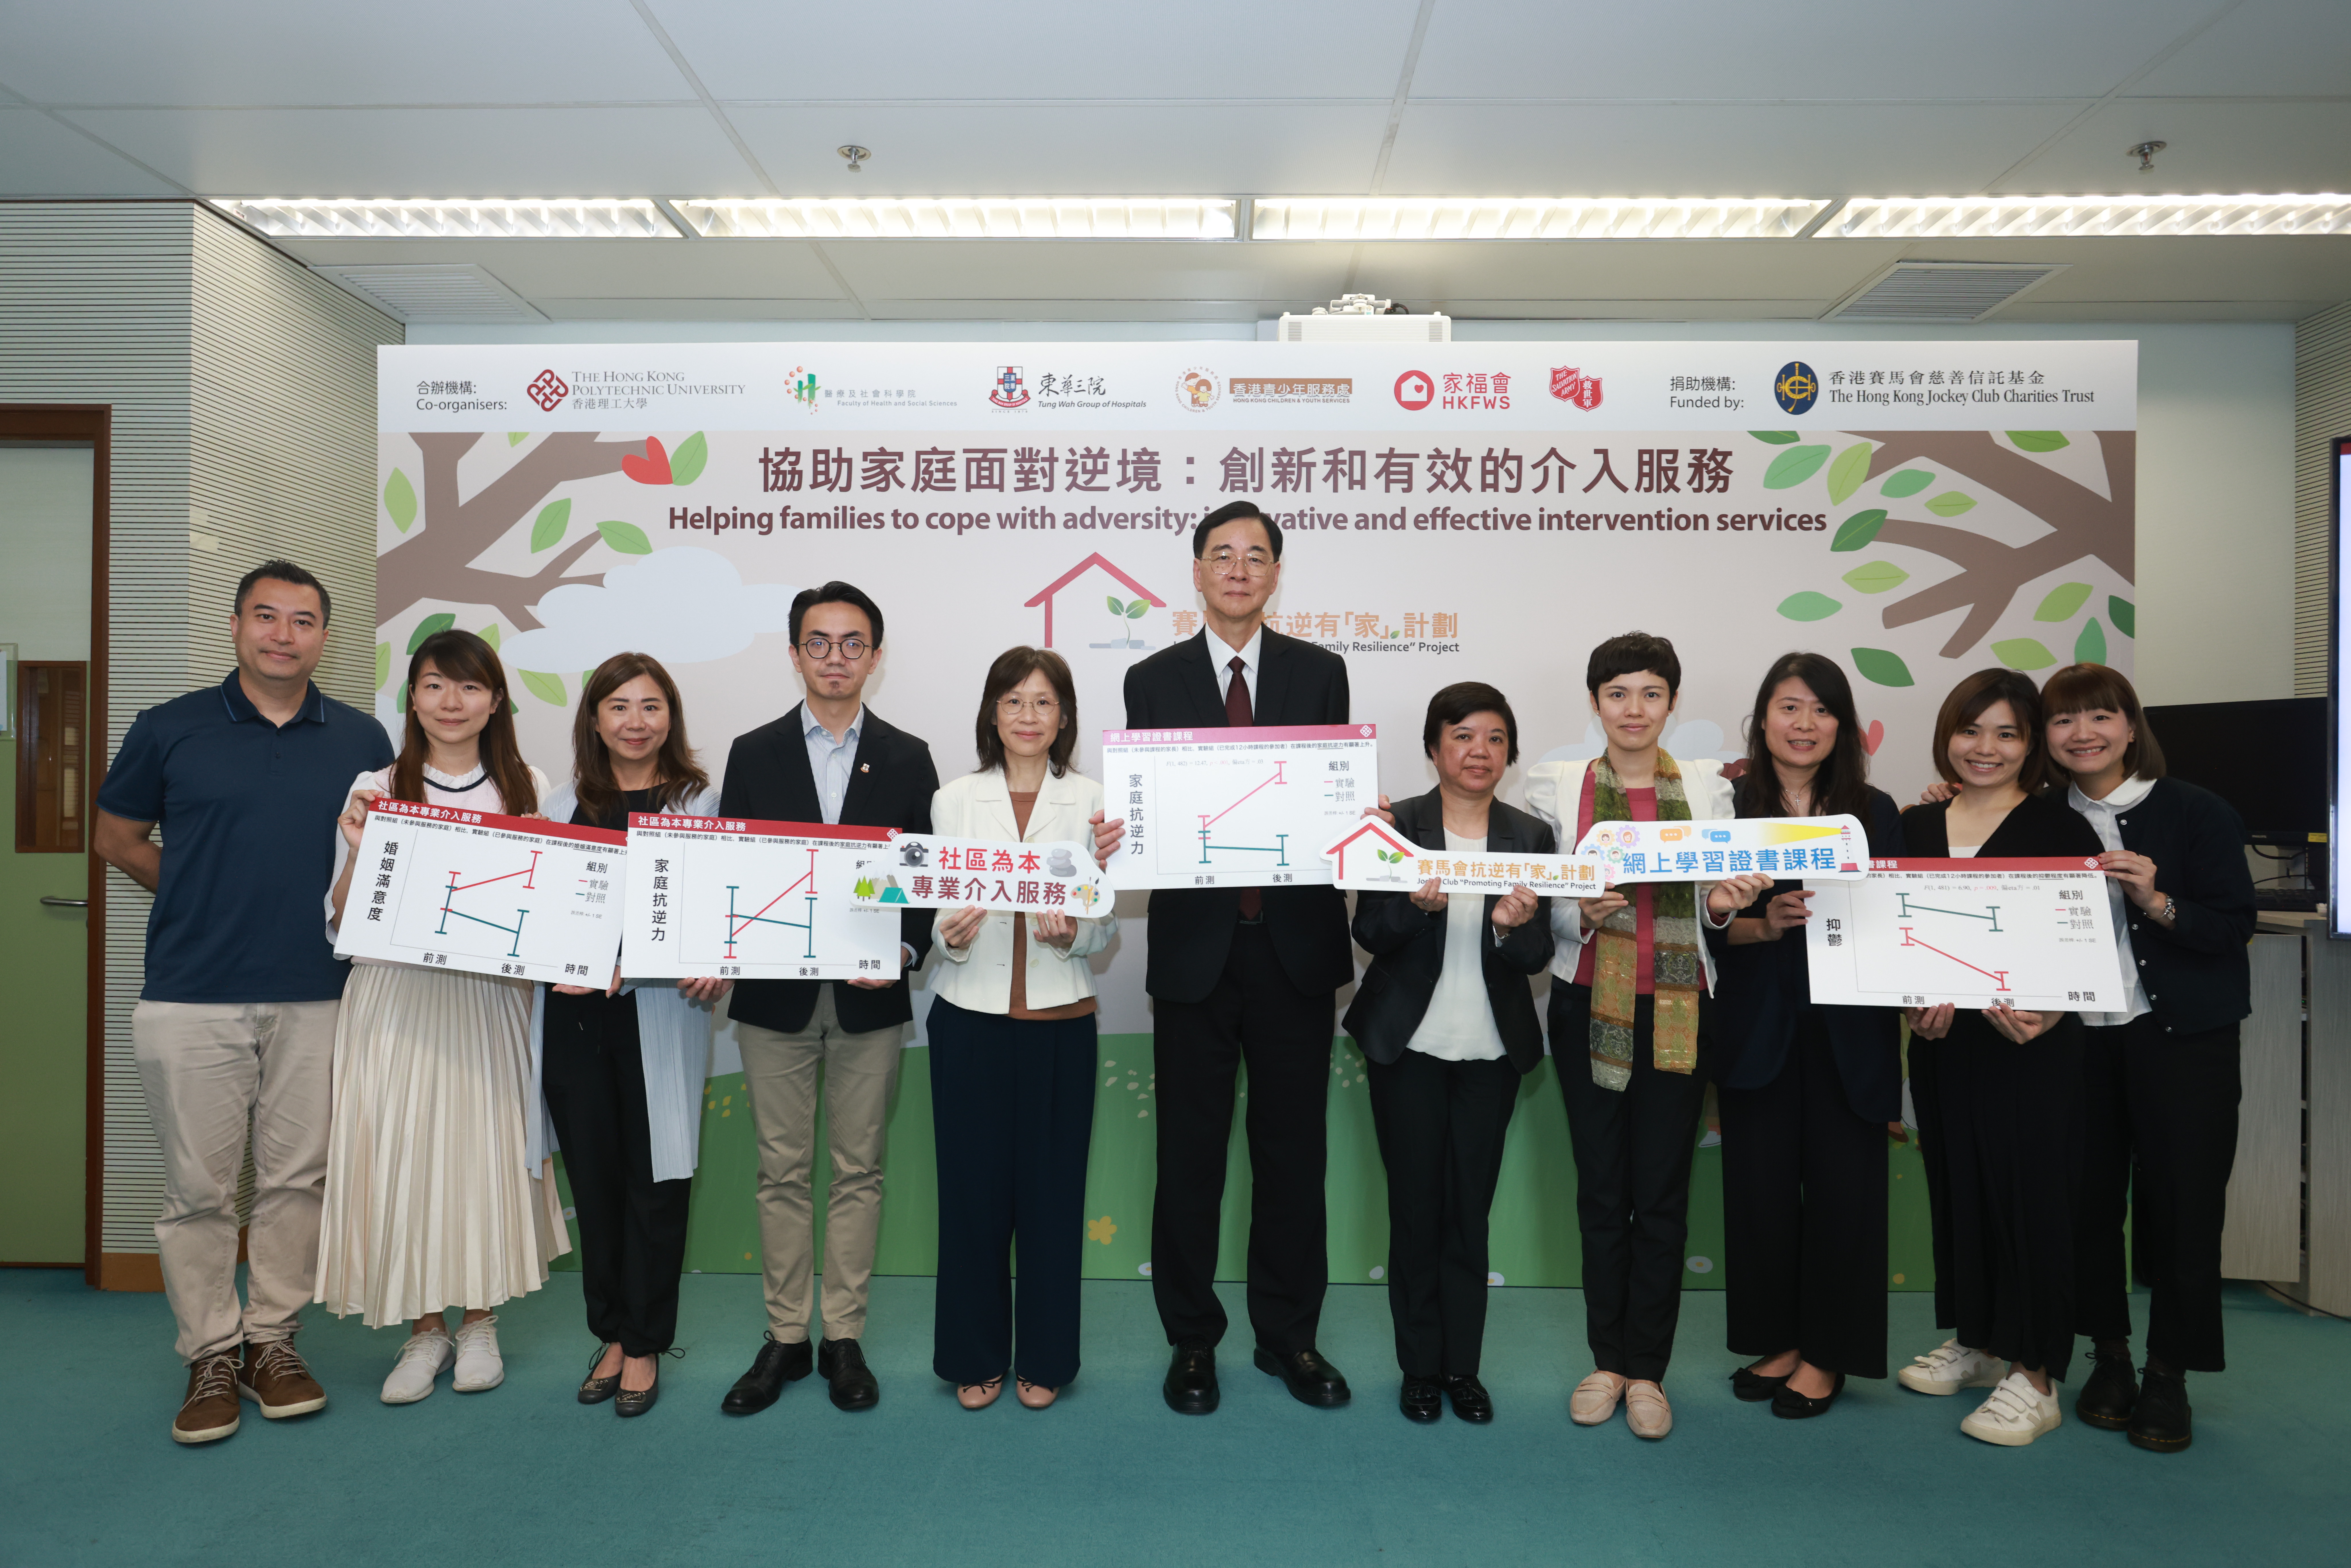 PolyU, with the support of The Hong Kong Jockey Club Charities Trust, has partnered with Hong Kong Children and Youth Services, Hong Kong Family Welfare Society, The Salvation Army, and Tung Wah Group of Hospitals to deliver a three–year project ‘Jockey Club “Promoting Family Resilience” Project’ to develop innovative and effective intervention services.